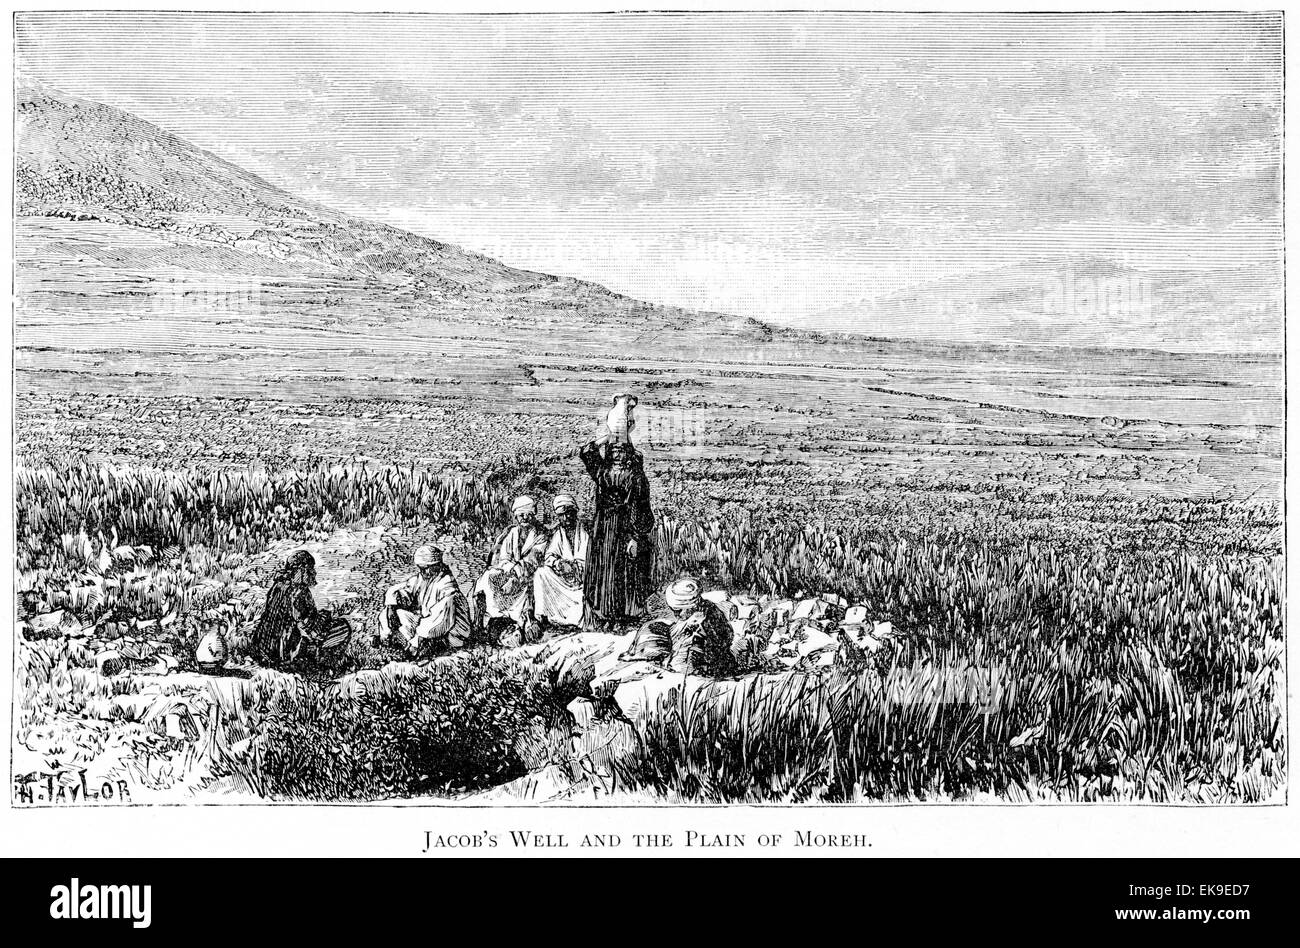 An engraving of Jacobs Well and the Plain of Moreh scanned at high resolution from a book printed in 1889. Stock Photo